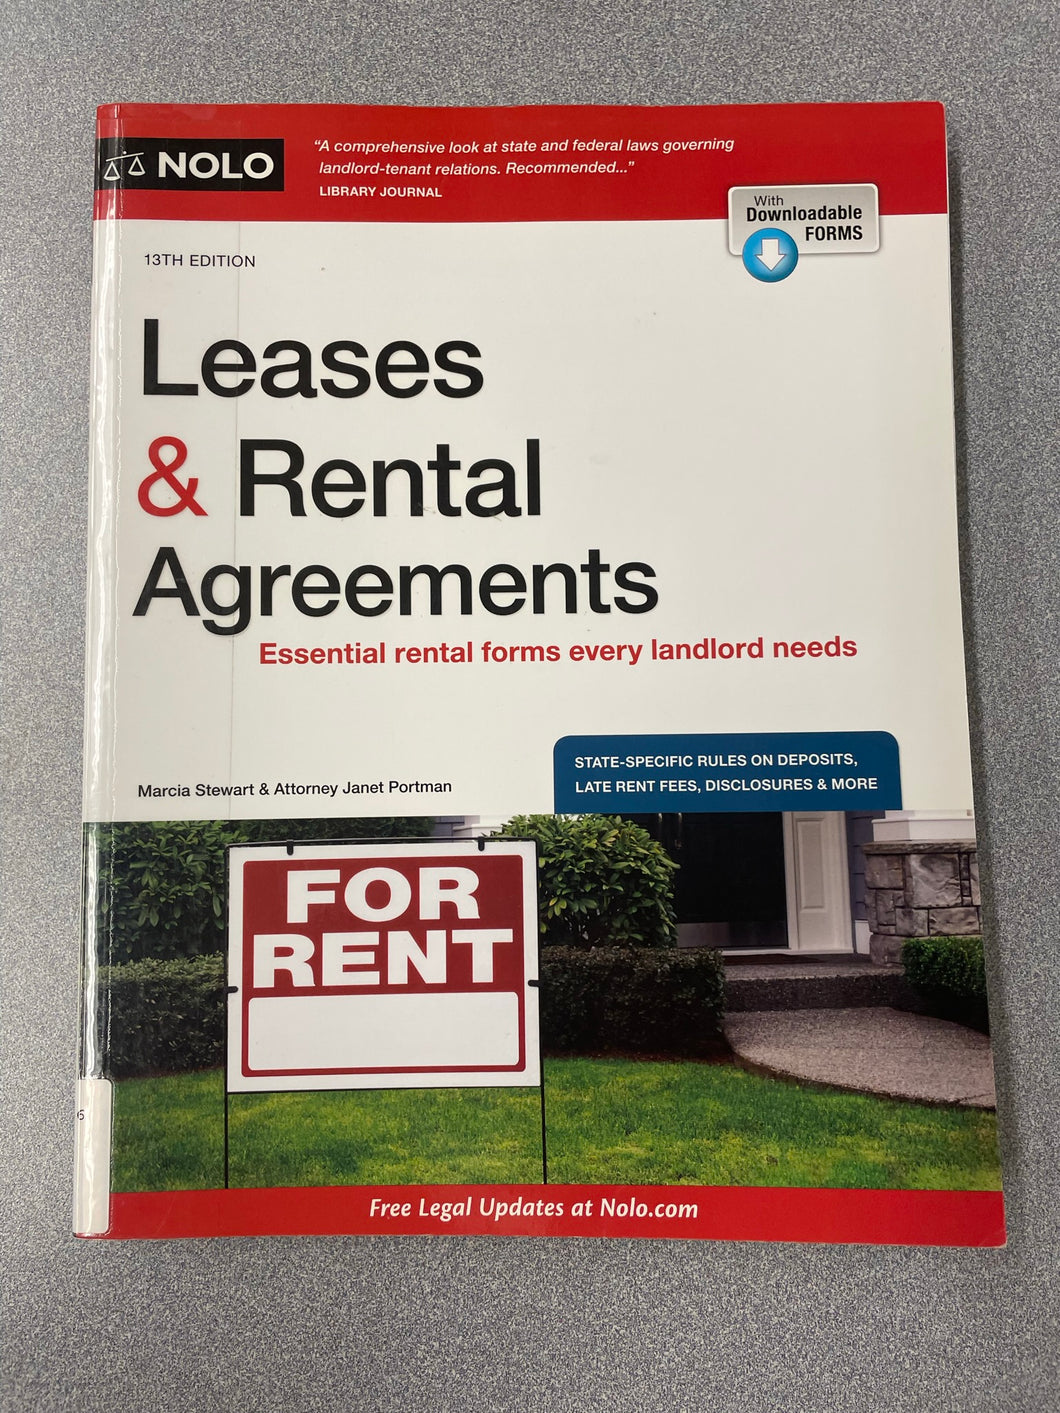 Leases & Rental Agreements: Essential Rental Forms Every Landlord Needs, Stewart, Marcia and Janet Portman [2019] LAW 10/22